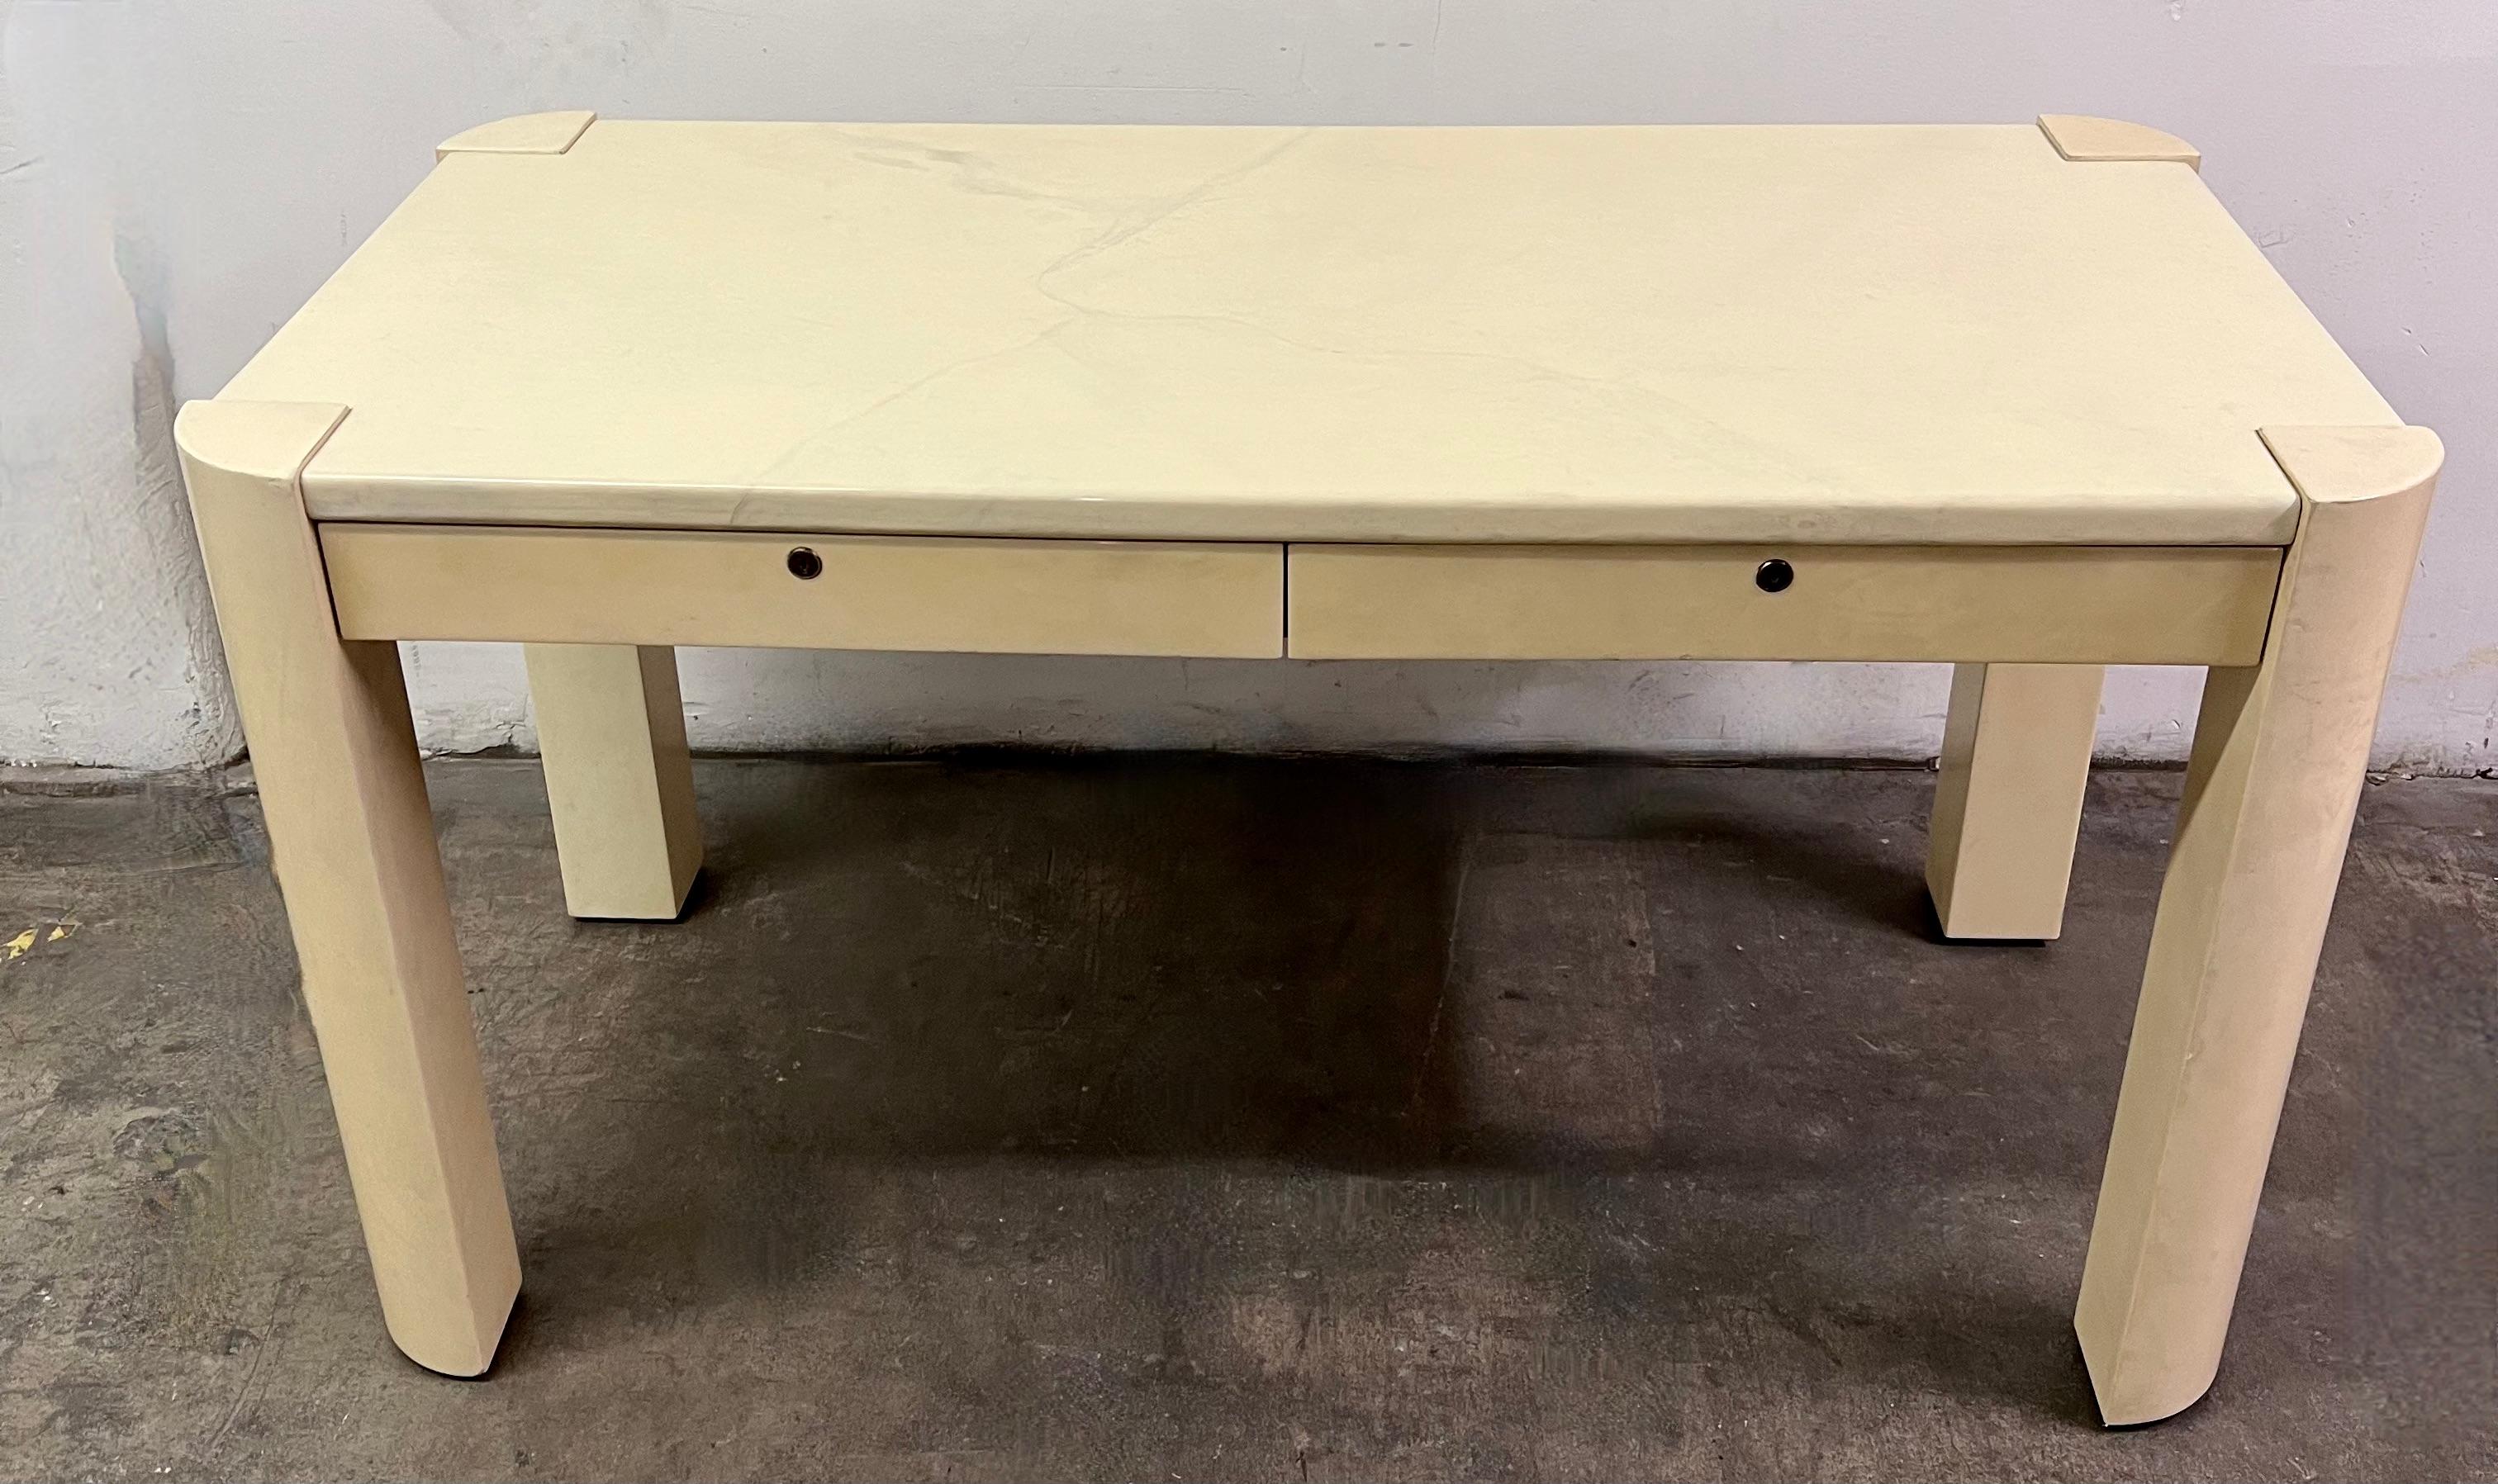 Iconic mid-century Designer, Karl Springer two drawer desk. The Desk is hand crafted of Lacquered Goatskin and has radius legs all meticulously designed for a seamless look. The drawers have the original key are are also finely made with space for